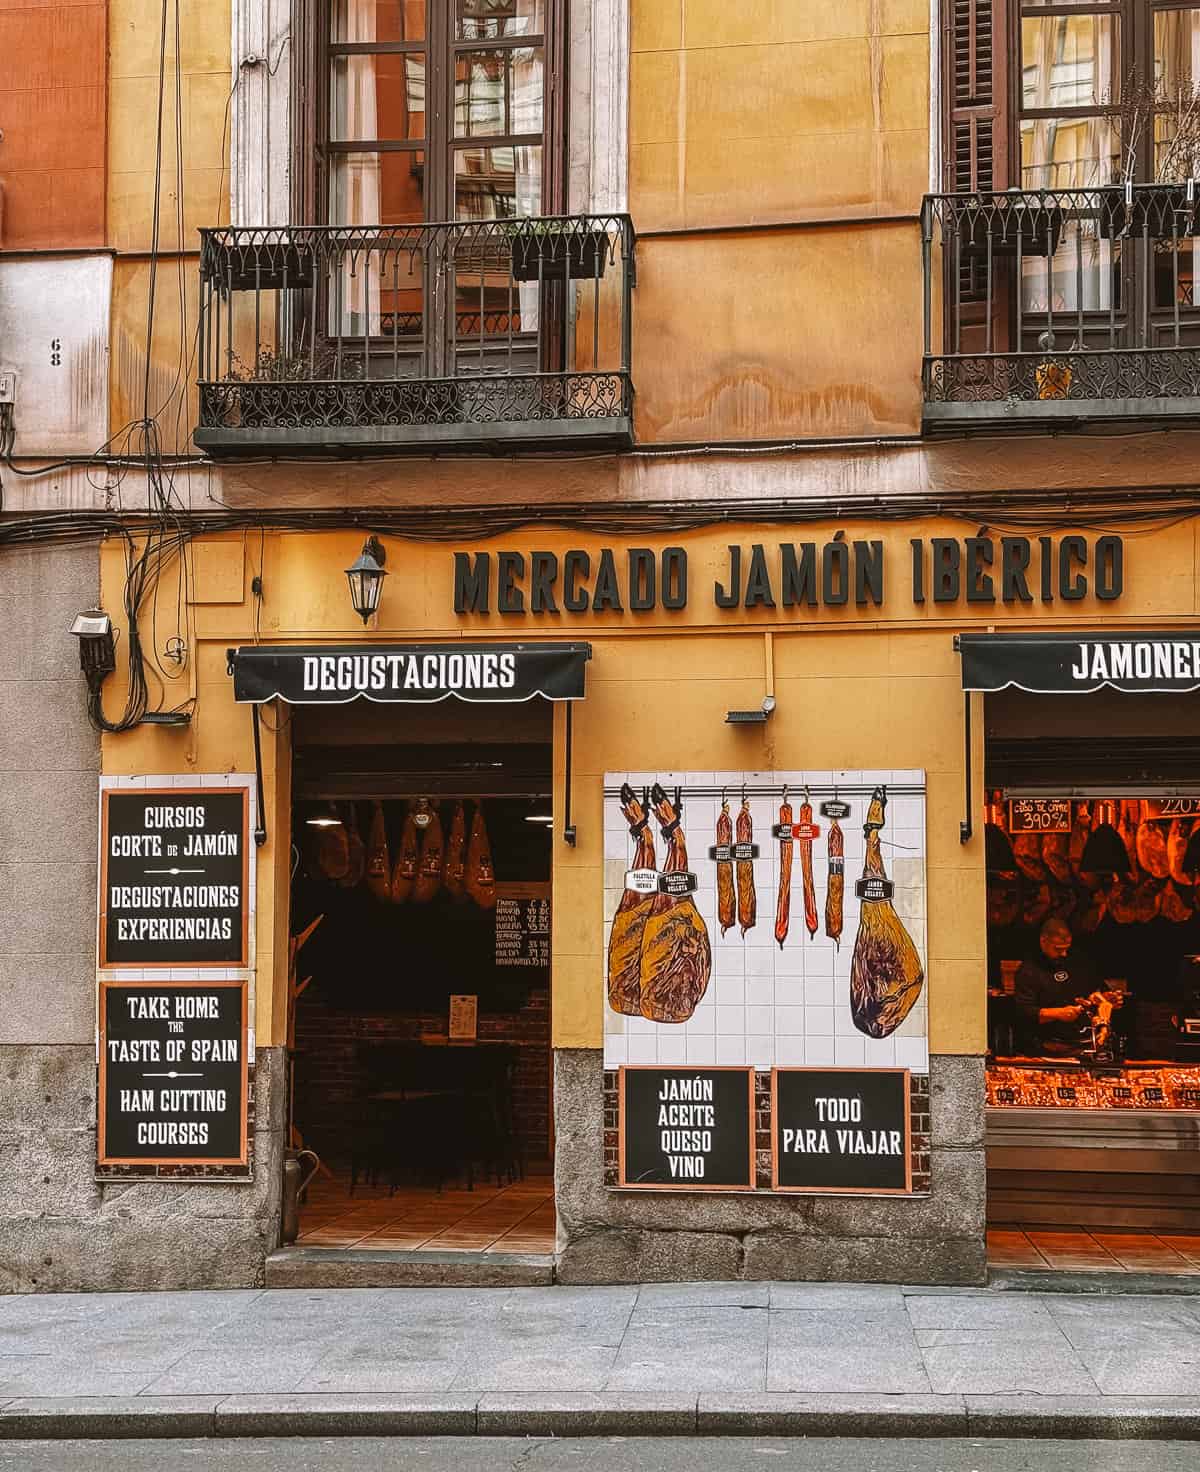 The storefront of Mercado Jamón Ibérico invites passersby with its bold signage, offering a taste of Spain through jamón, cheese, and wine, epitomizing the rich culinary culture of the region.